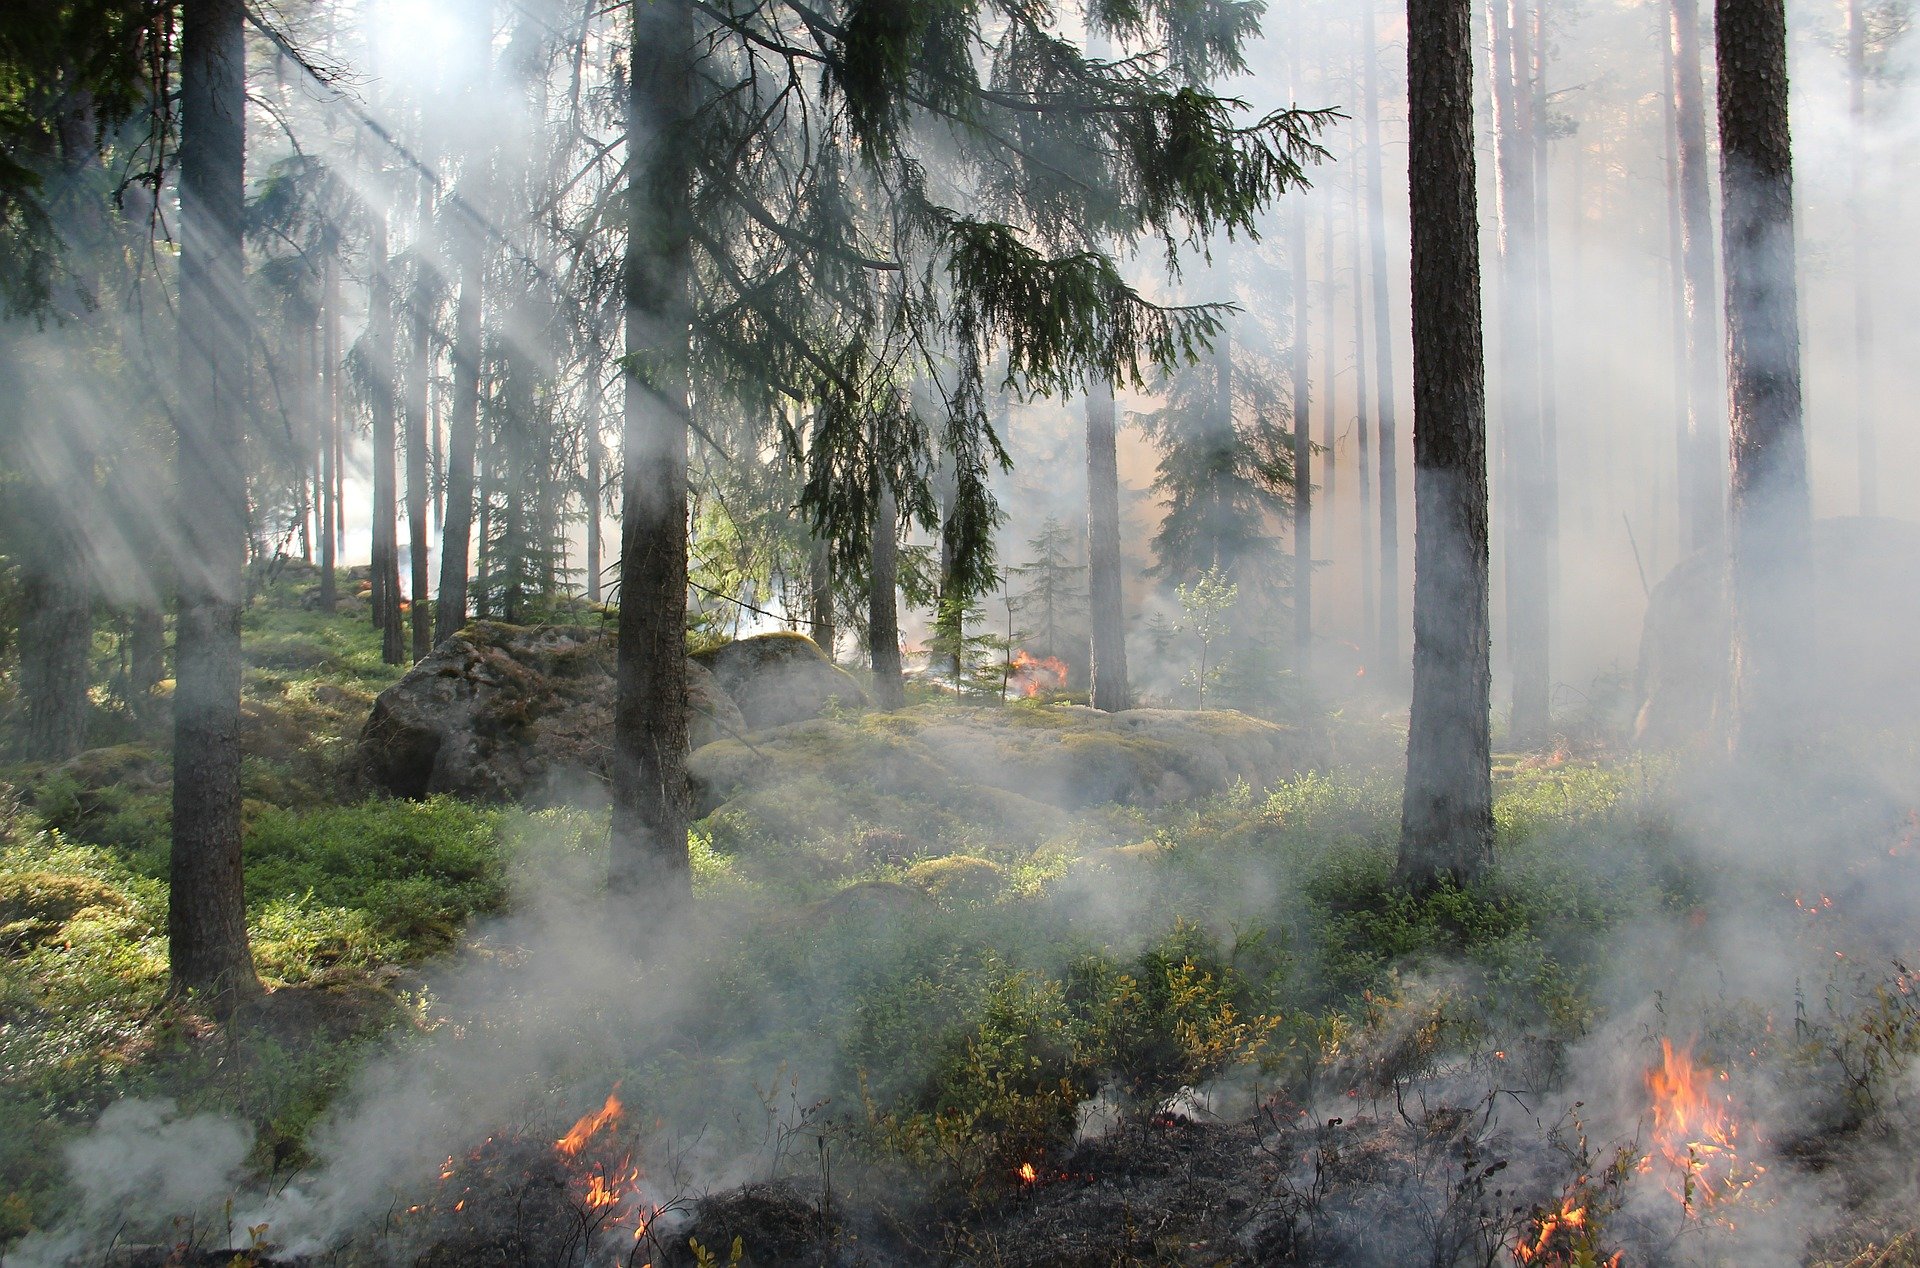 EPA clears Washington state to do more controlled burns to prevent wildfires